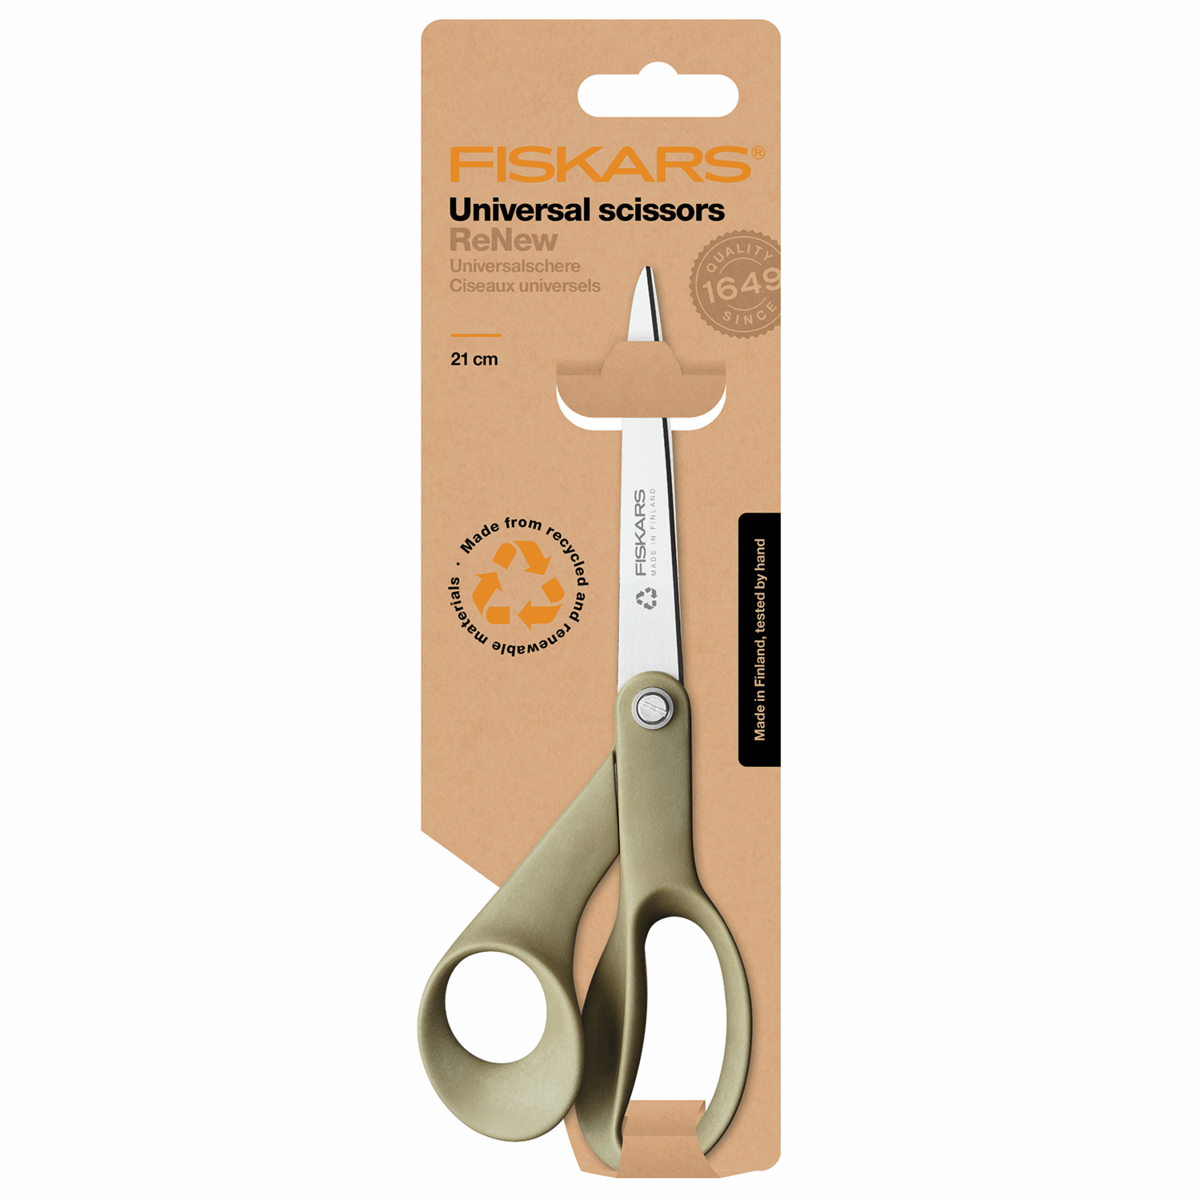 Fiskars scissors and shears for around the home  office